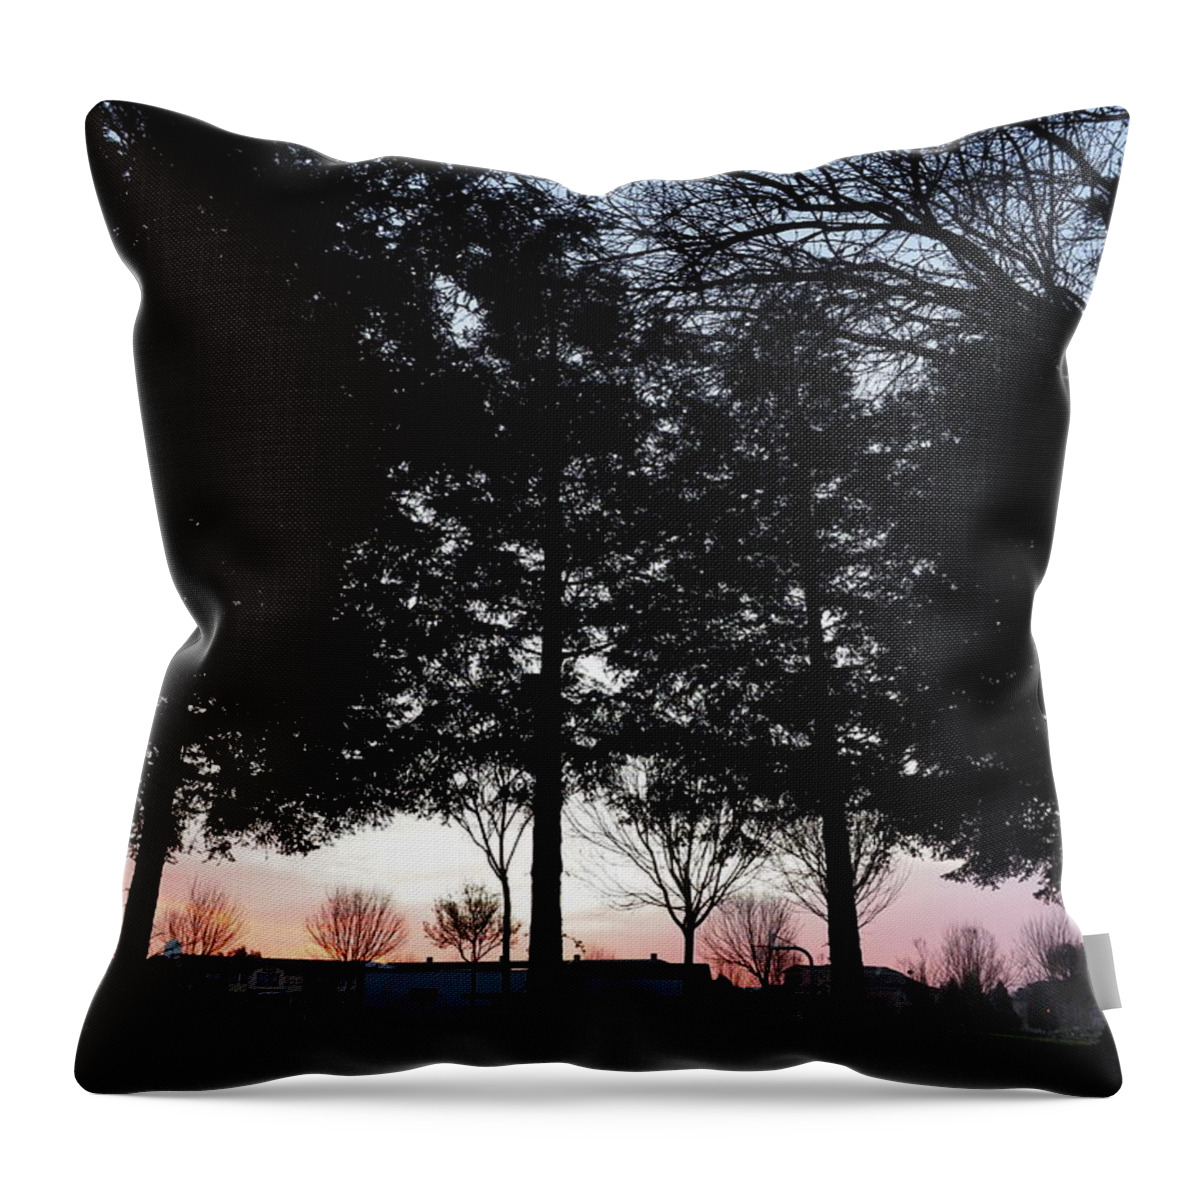 Landscape Throw Pillow featuring the photograph Neighborhood Dawn by Richard Thomas